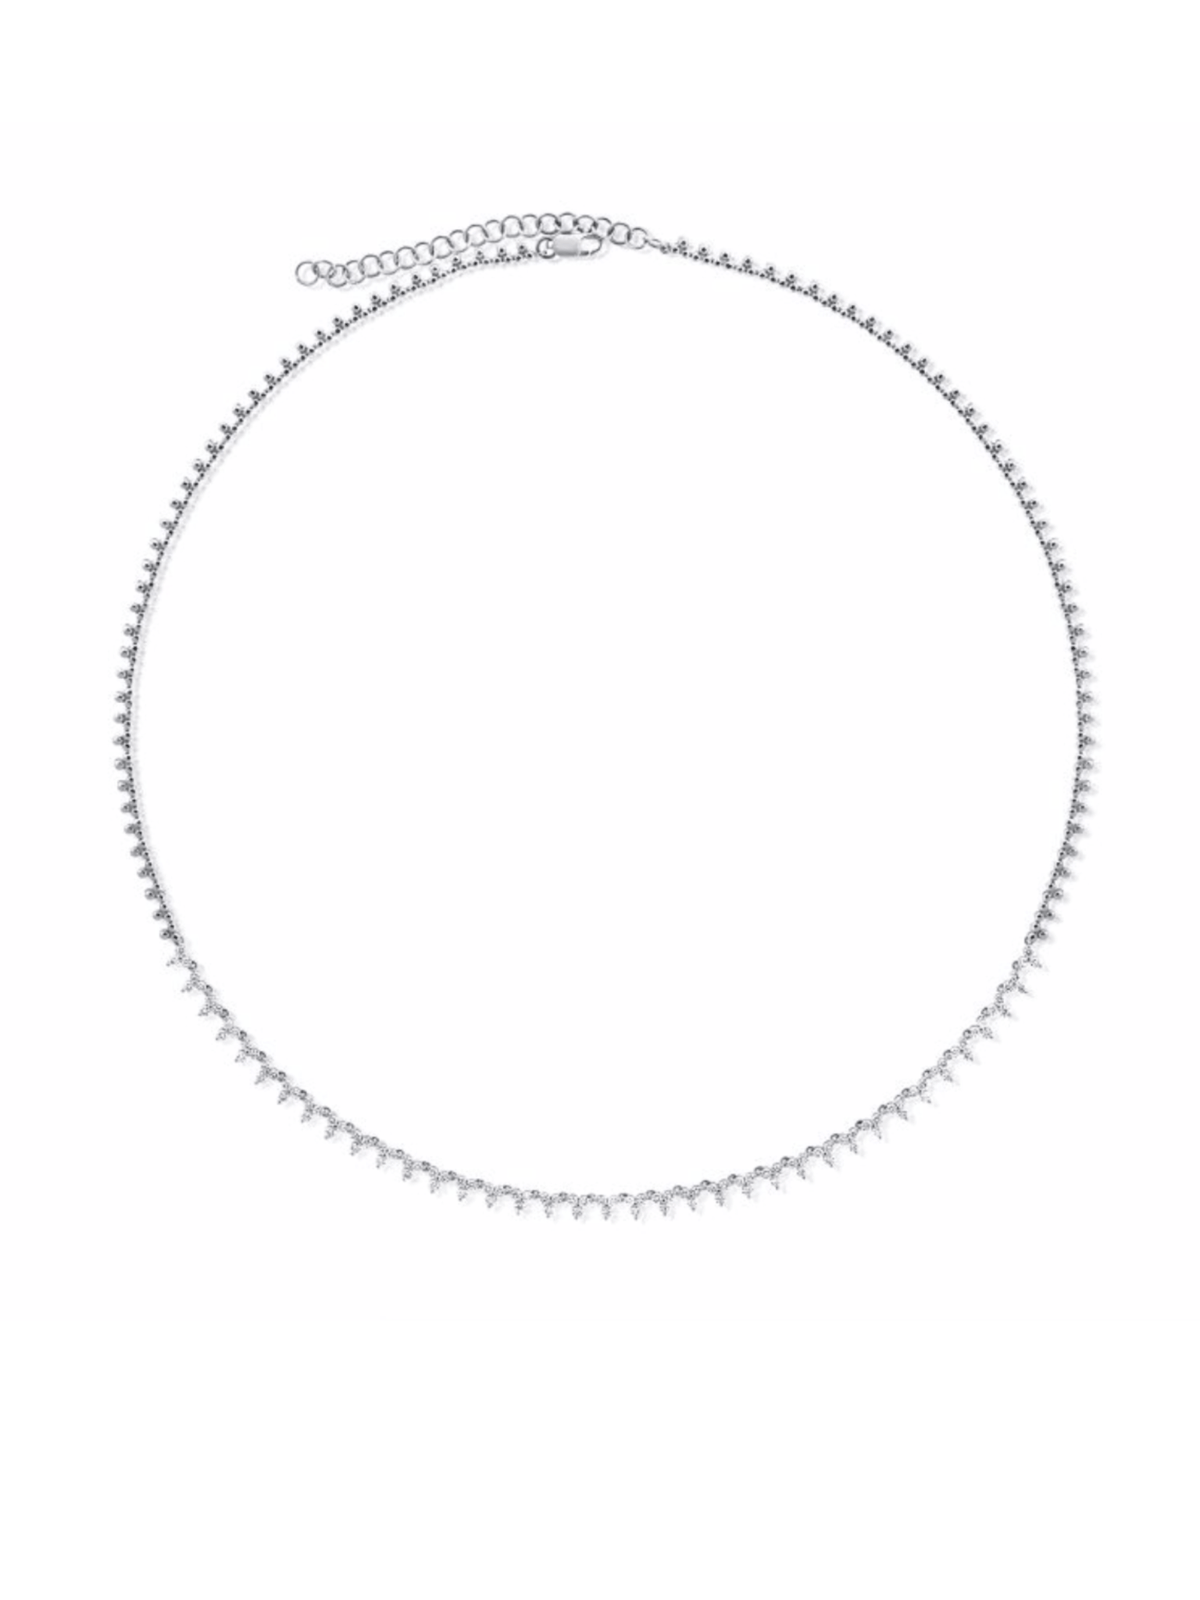 white gold Diamond Trio necklace on beaded chain with white image